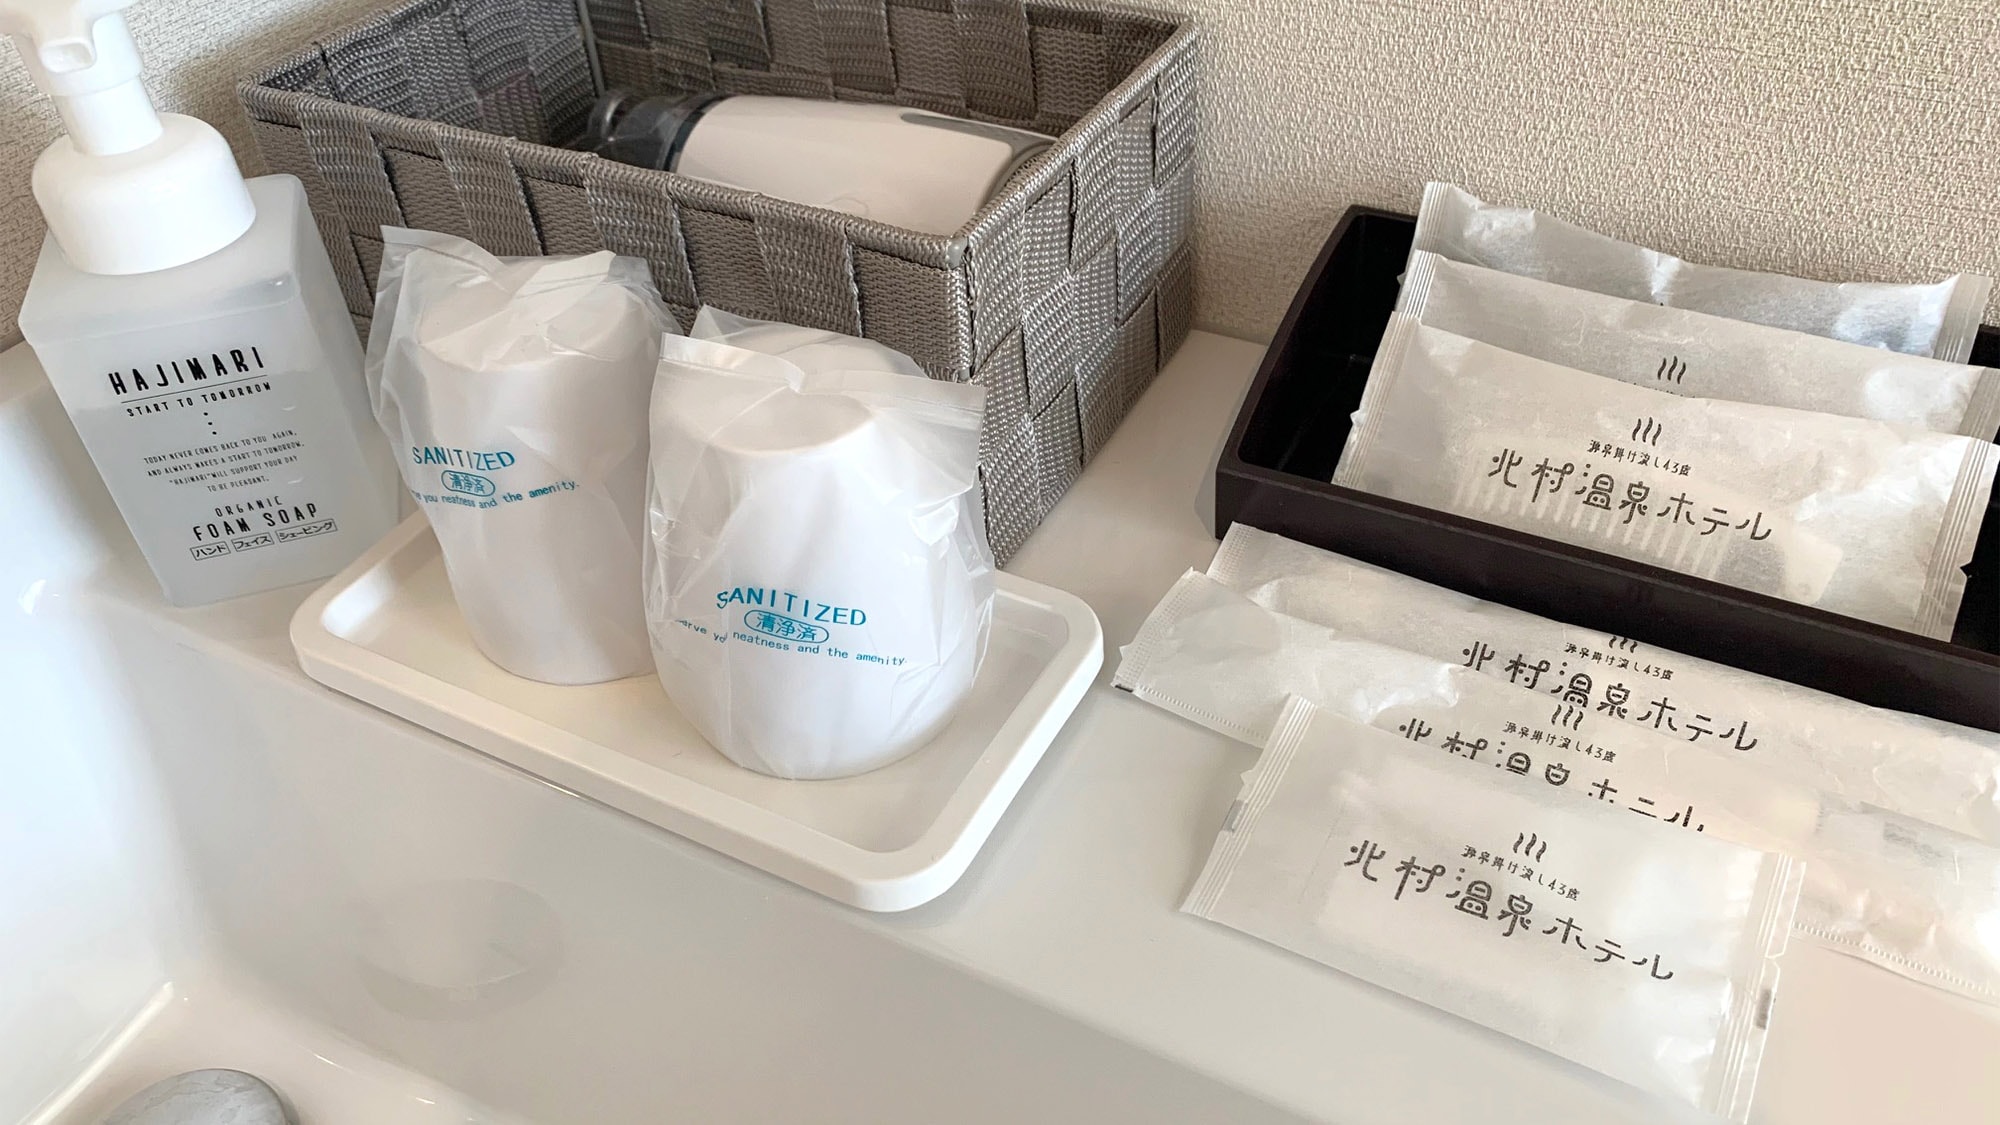 ・ Amenity such as hair dryer and toothpaste set is provided in the guest room.